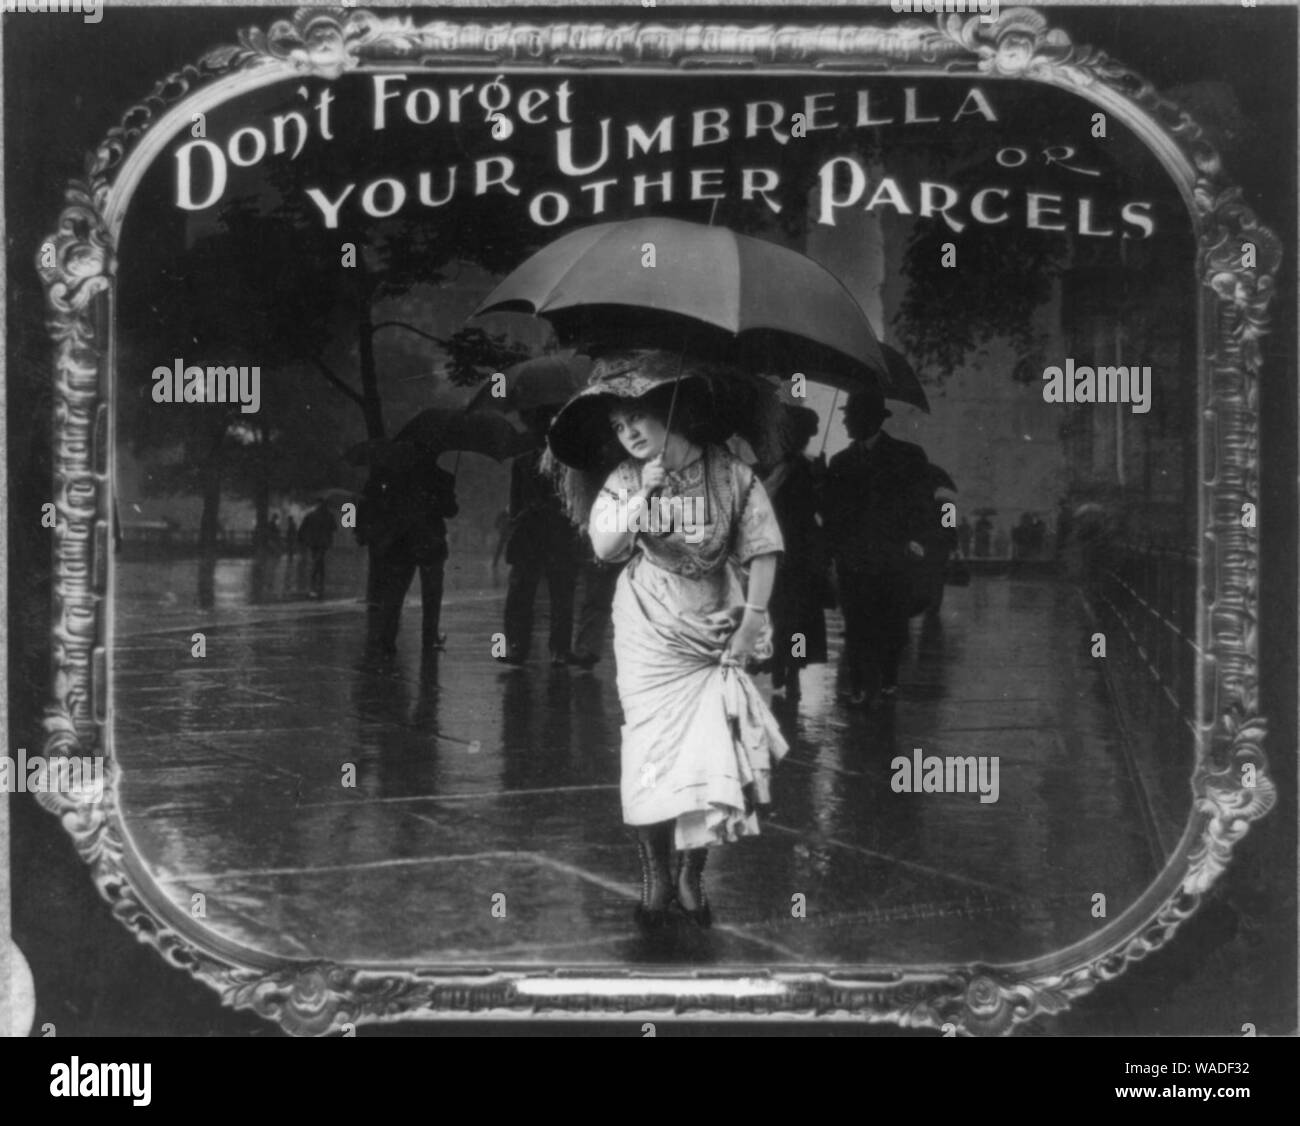 Don't forget your umbrella or other parcels Stock Photo